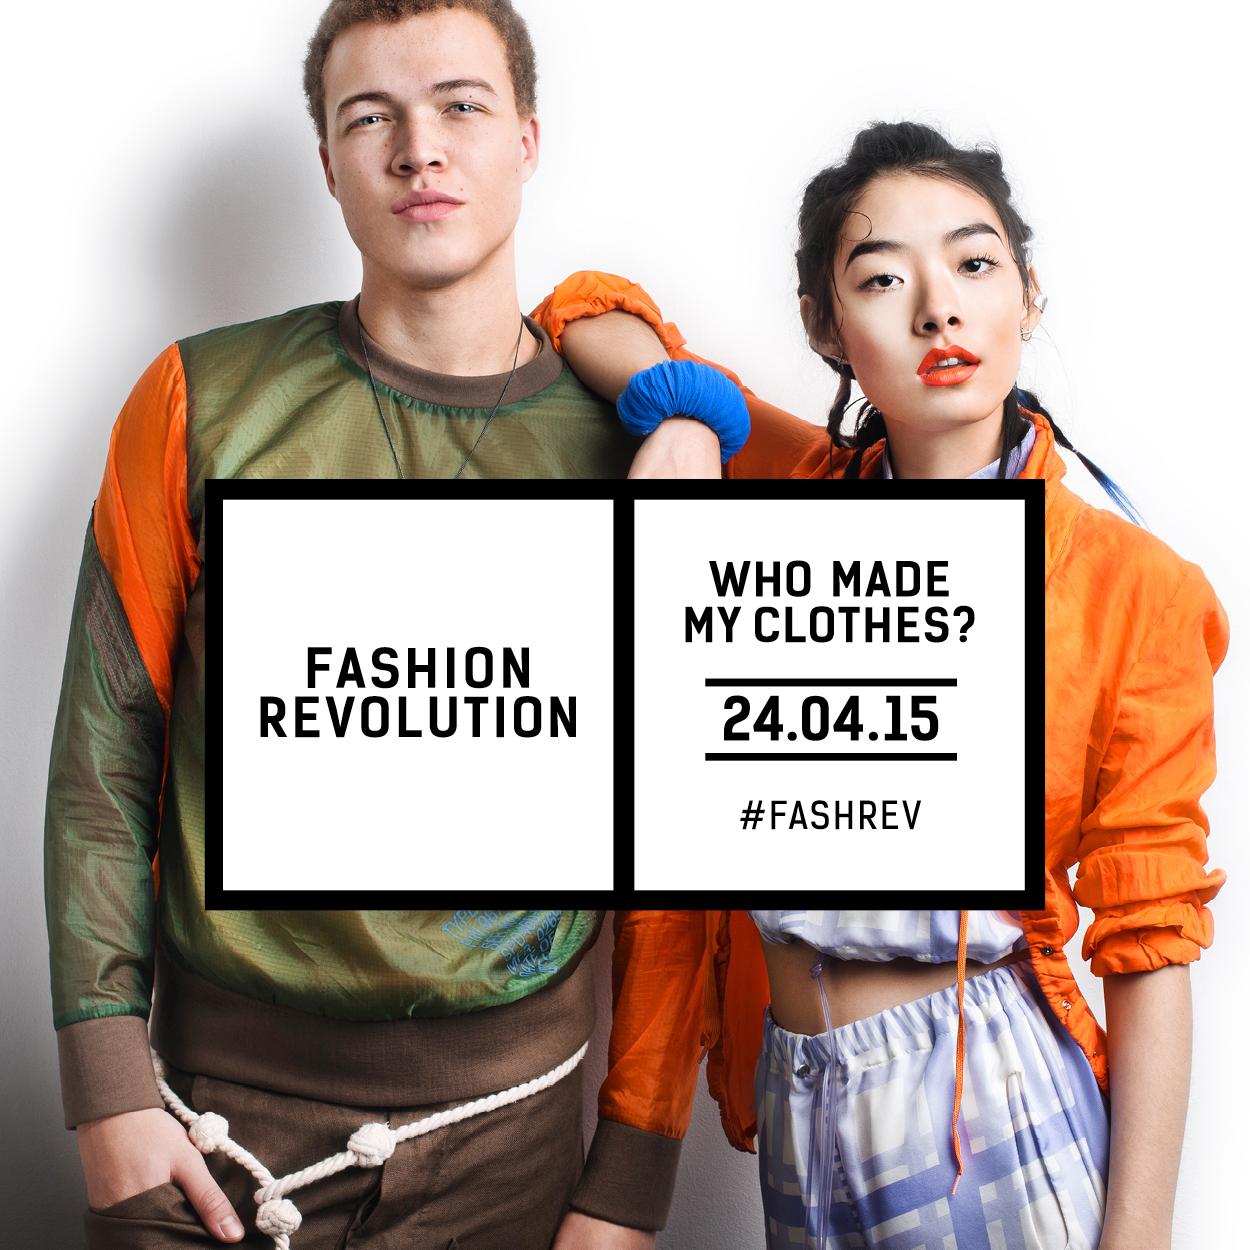 Fashion revolution day: who made your clothes?